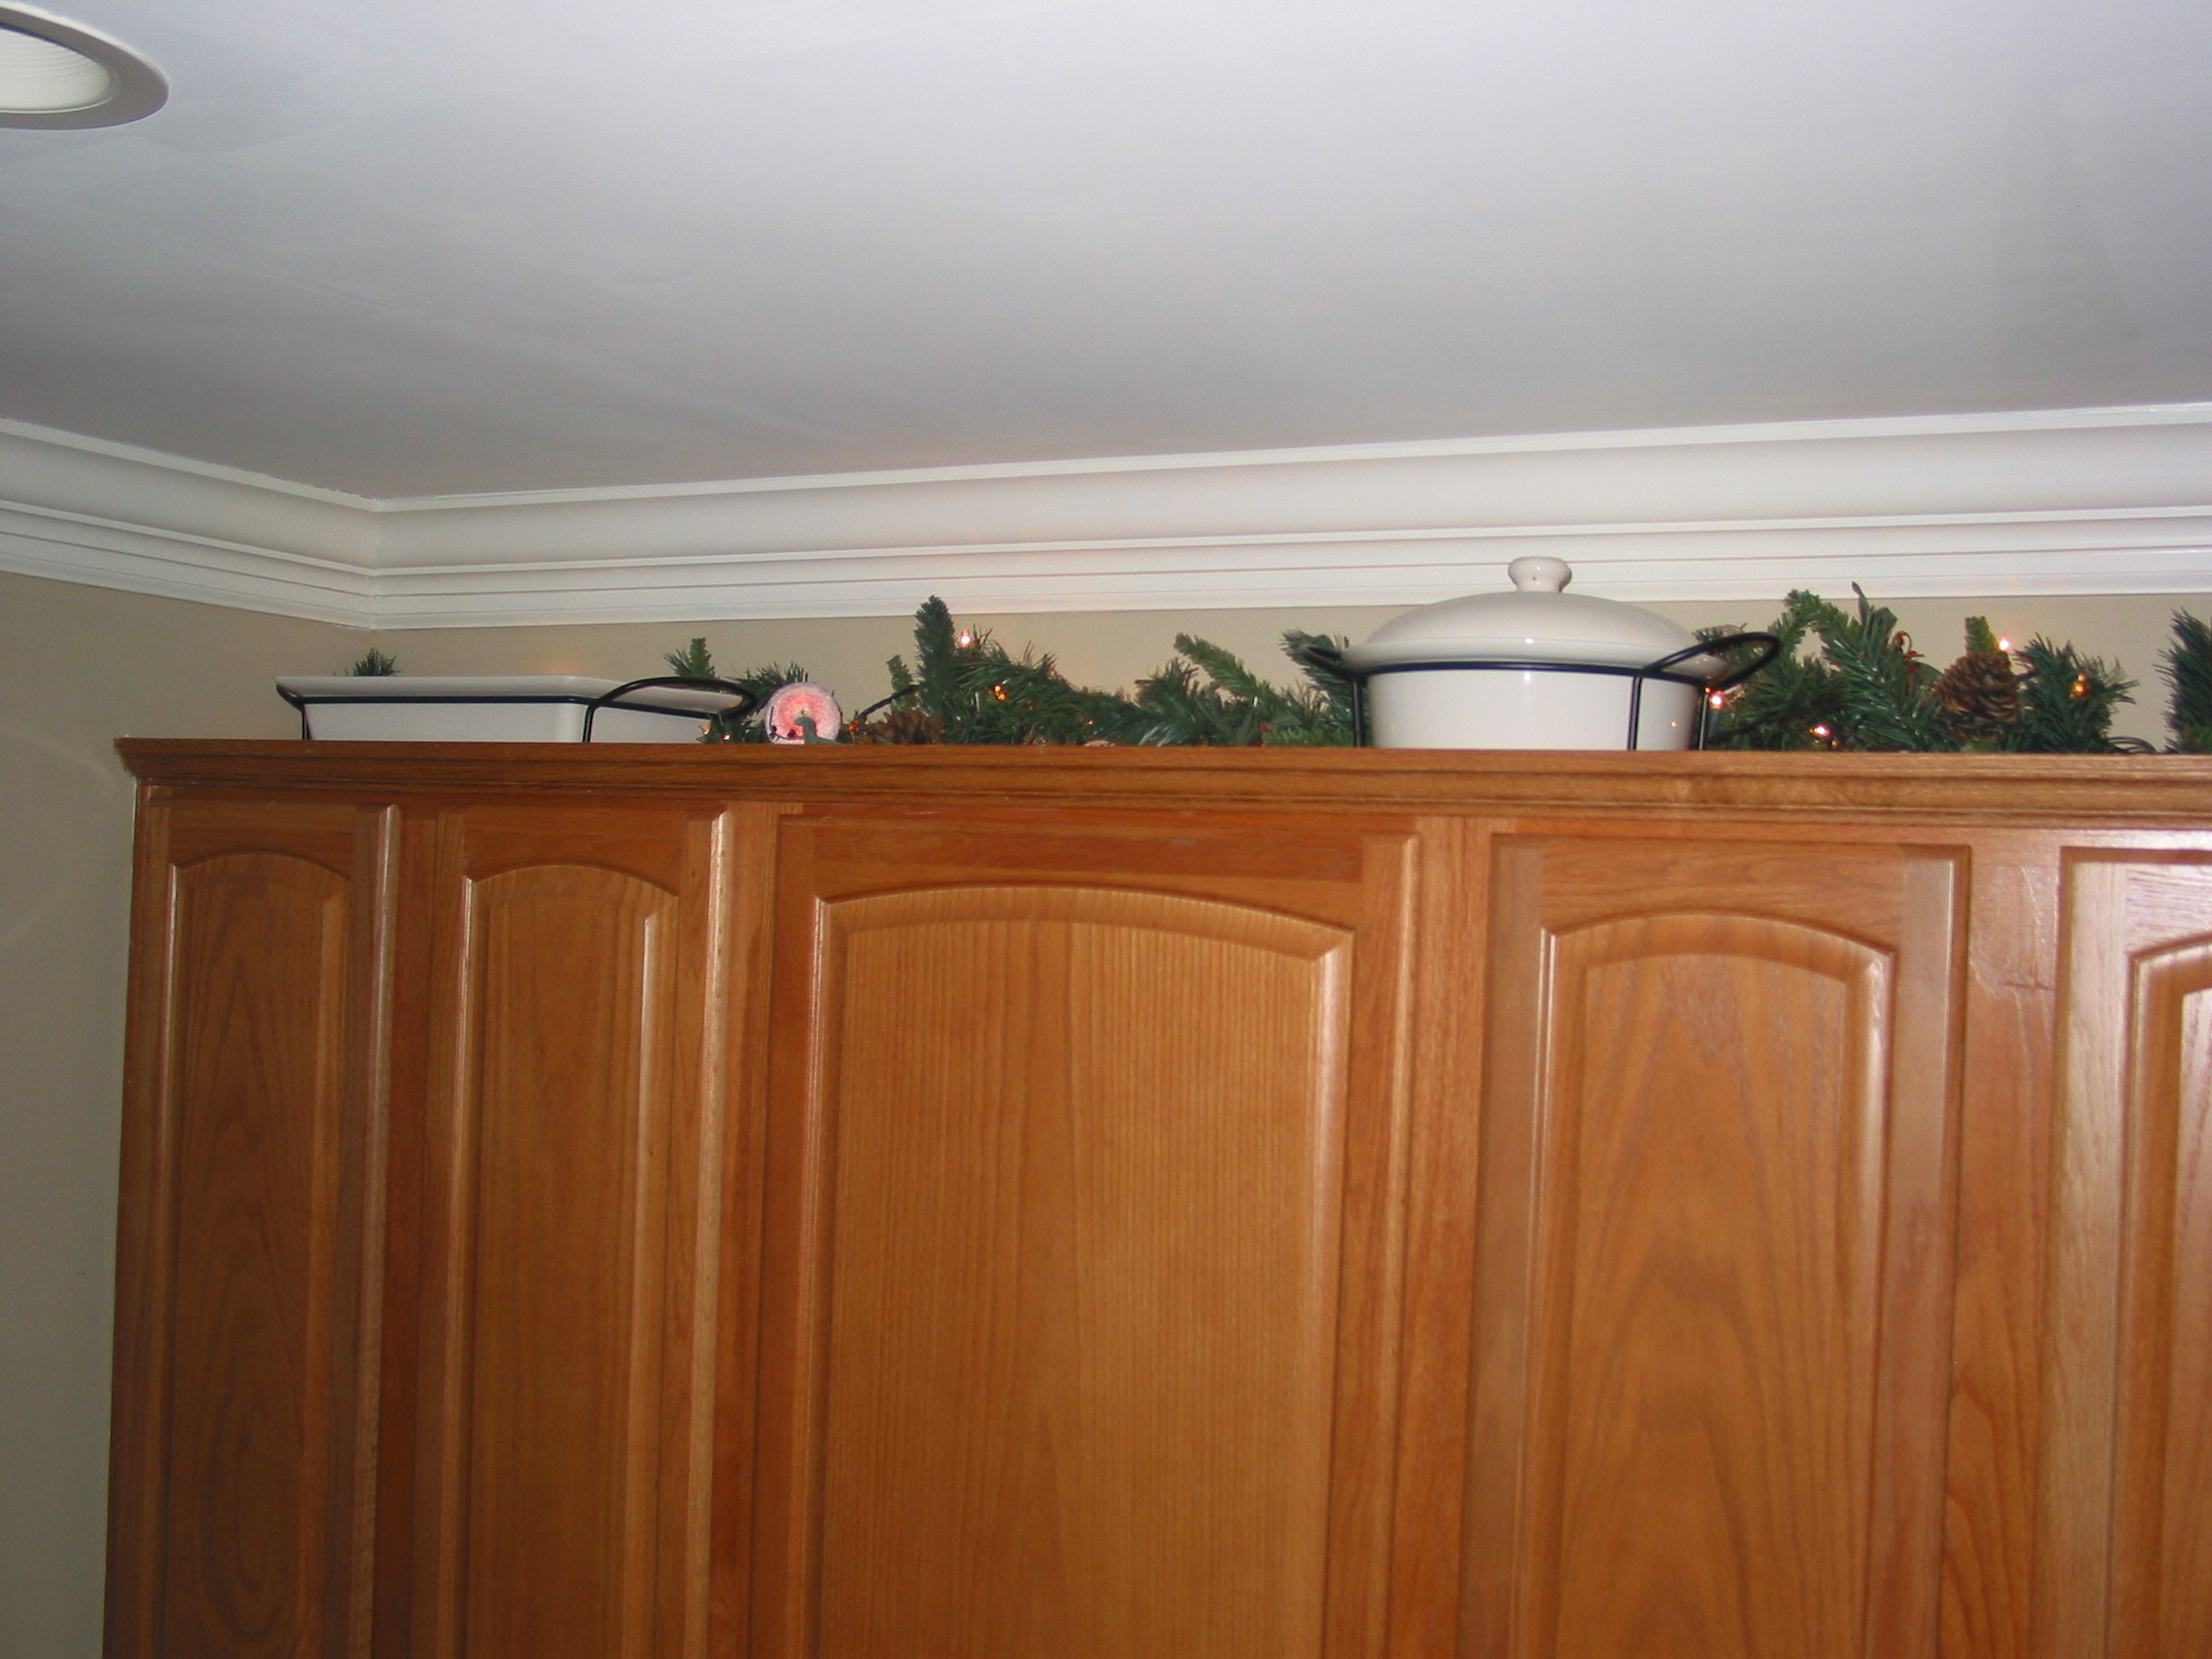 The Tricks You Need To Know For Decorating Above Cabinets Laurel